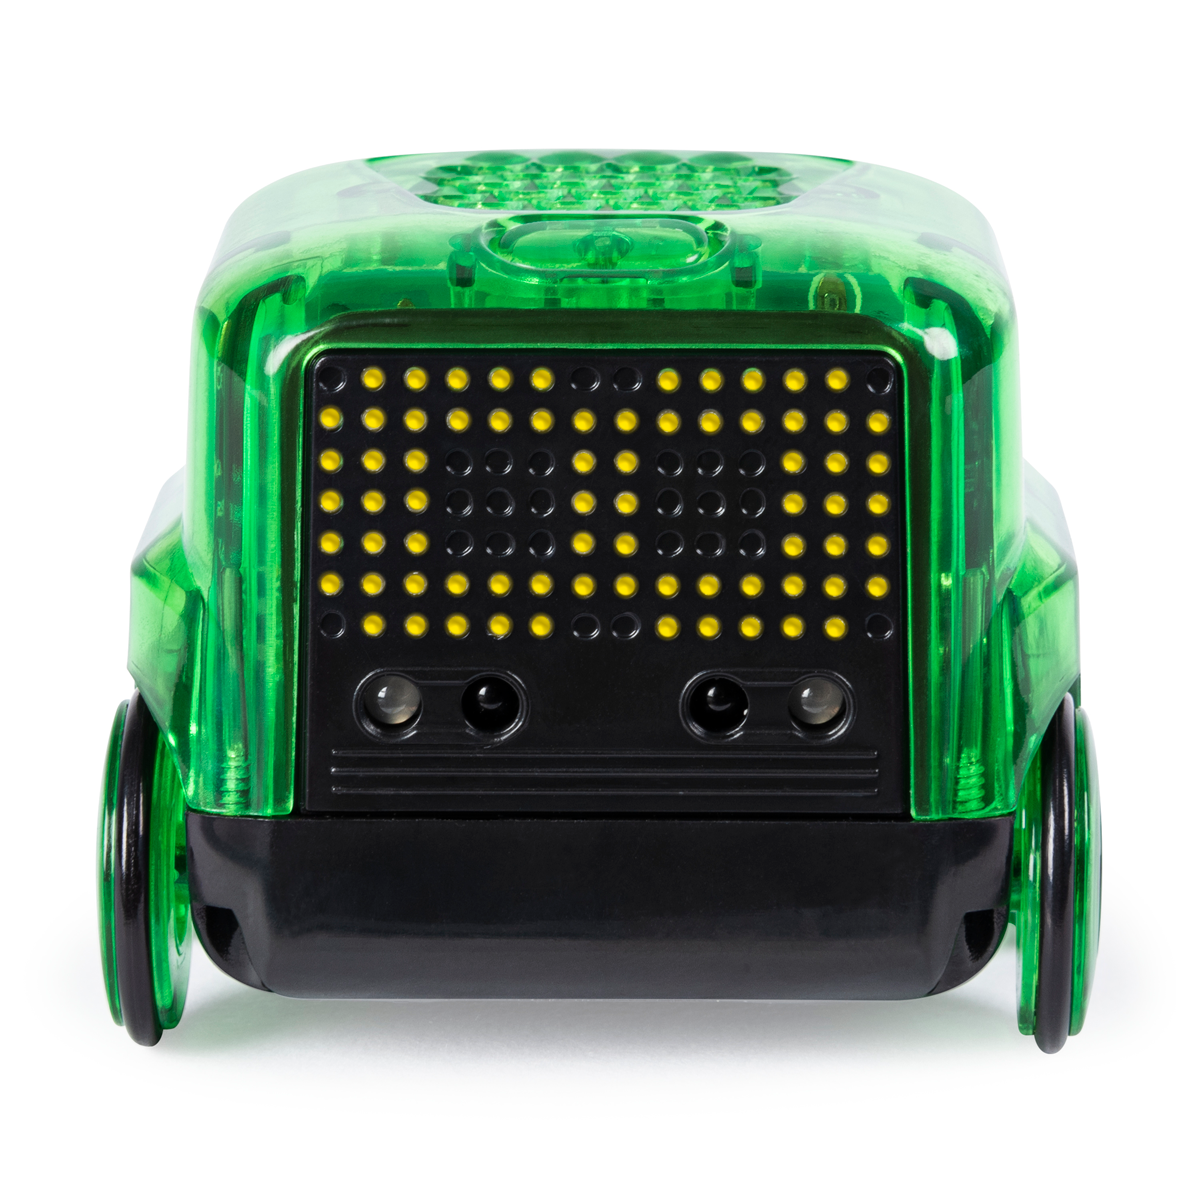 Novie Interactive Smart Robot with Over 75 Actions and Learns 12 Tricks Green 